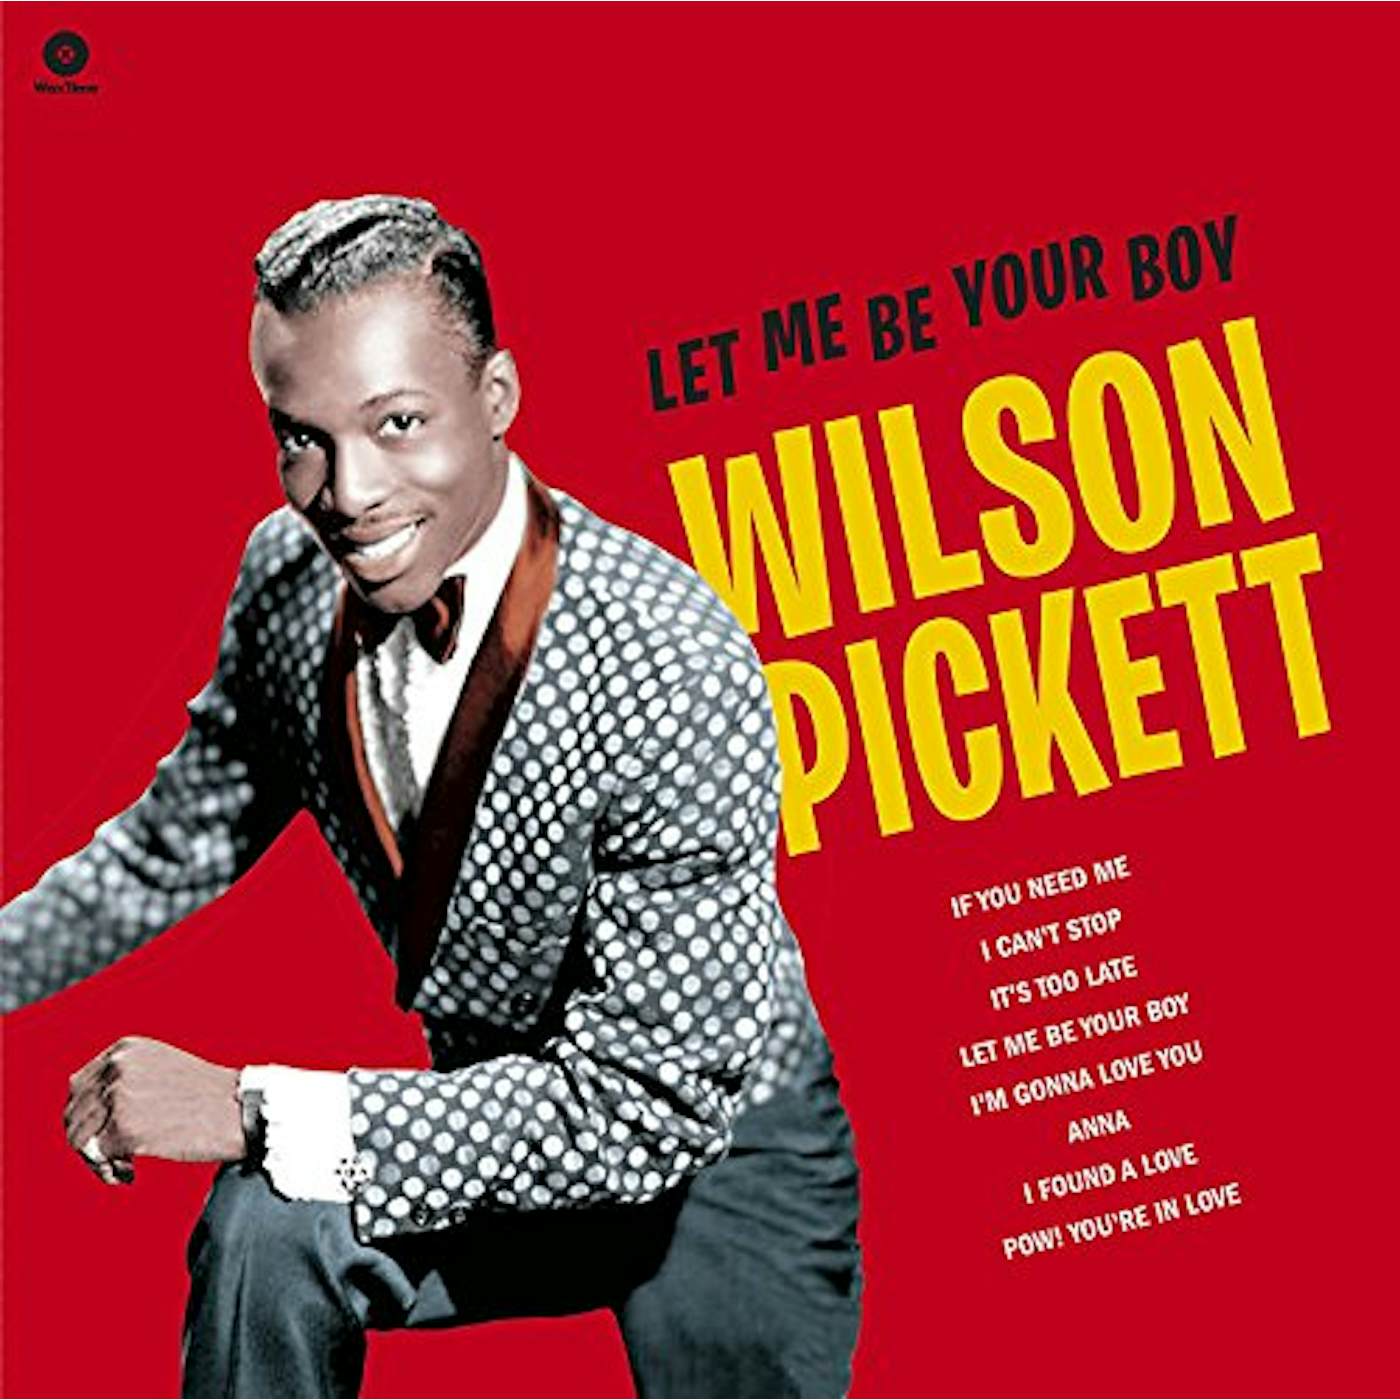 Wilson Pickett LET ME BE YOUR BOY: EARLY YEARS 1959-1962 Vinyl Record - 180 Gram Pressing